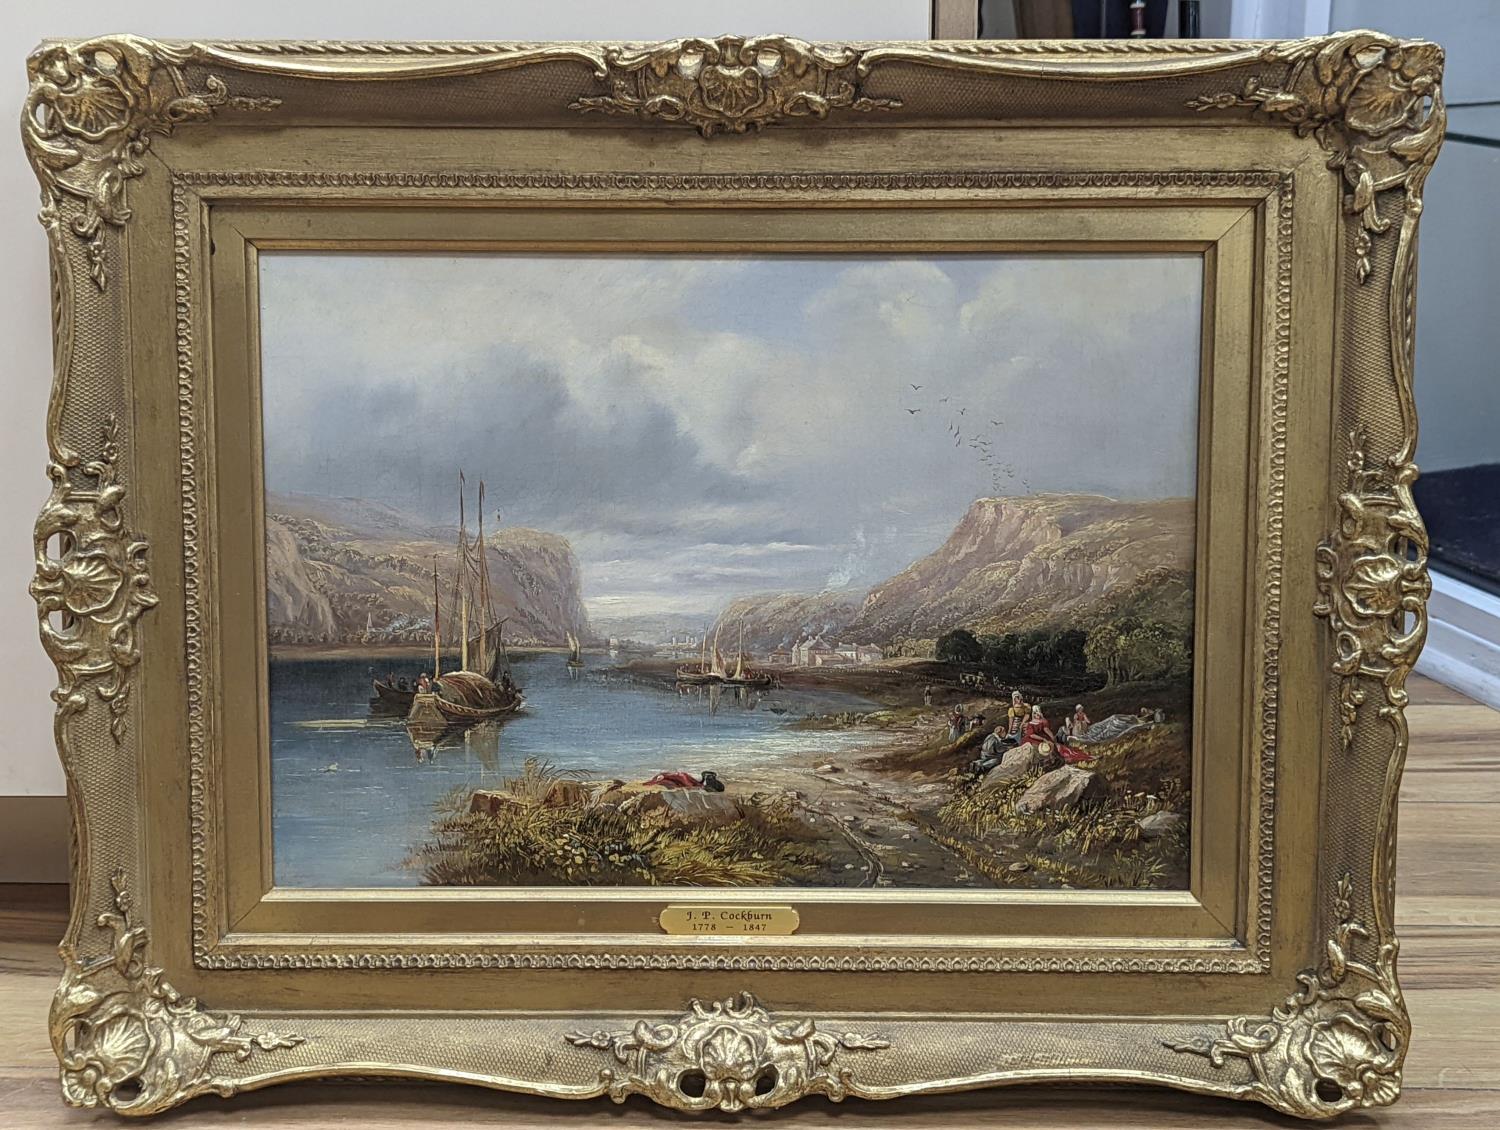 Attributed to James Pattison Cockburn, oil on canvas, lake scene 28.5x41cmWith gallery receipts - Image 2 of 4